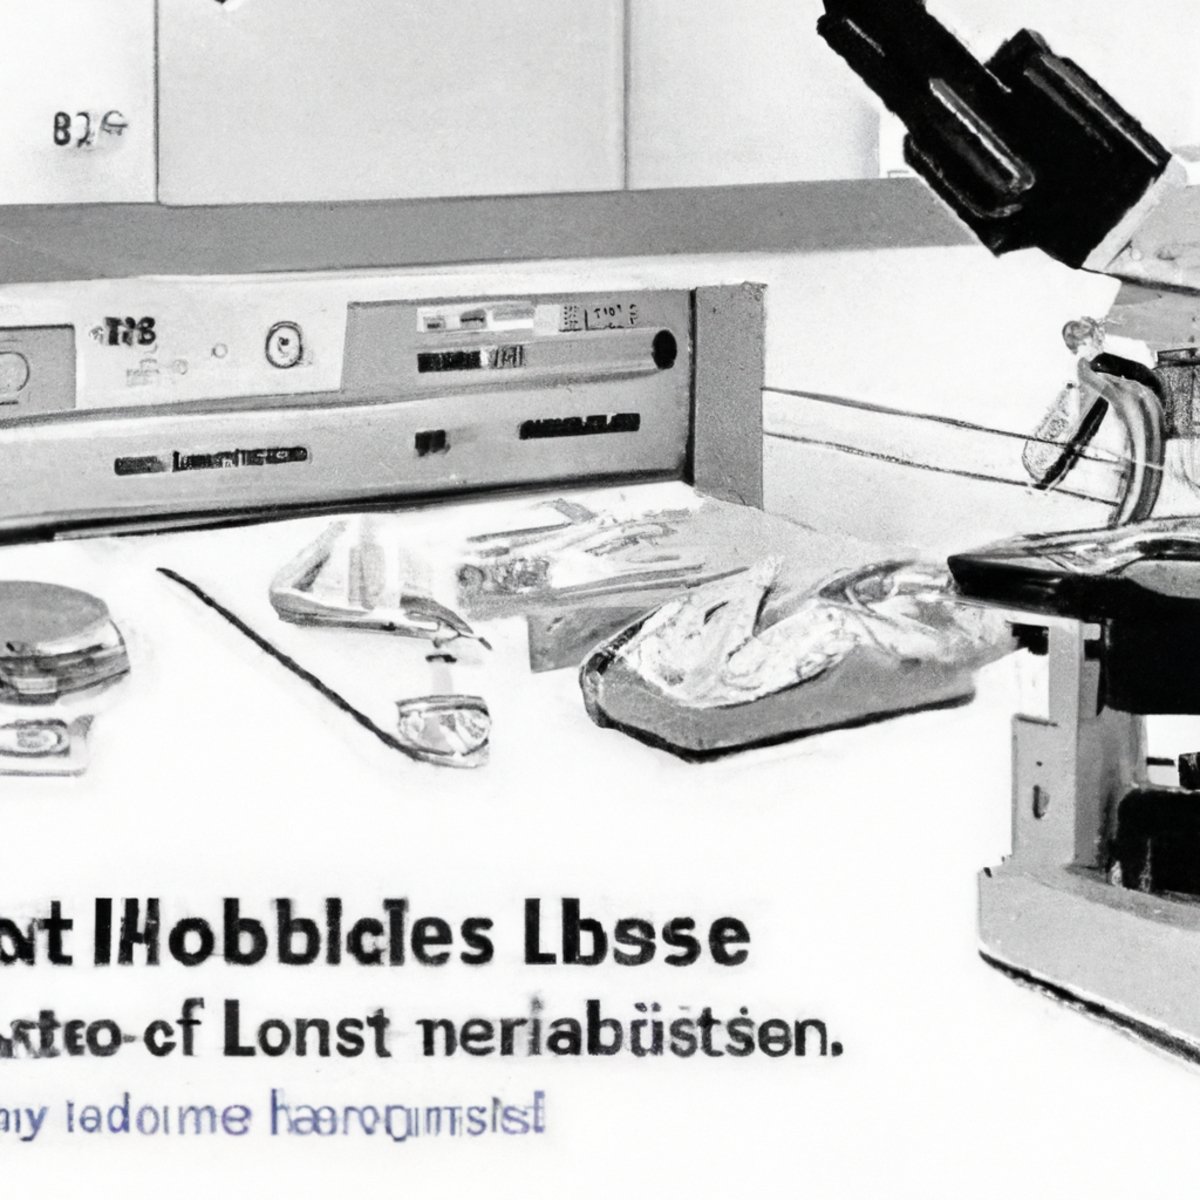 Hospital laboratory with state-of-the-art equipment, microscope, tissue samples, data analysis, lab coat, emphasizing early detection in Nesidioblastosis.